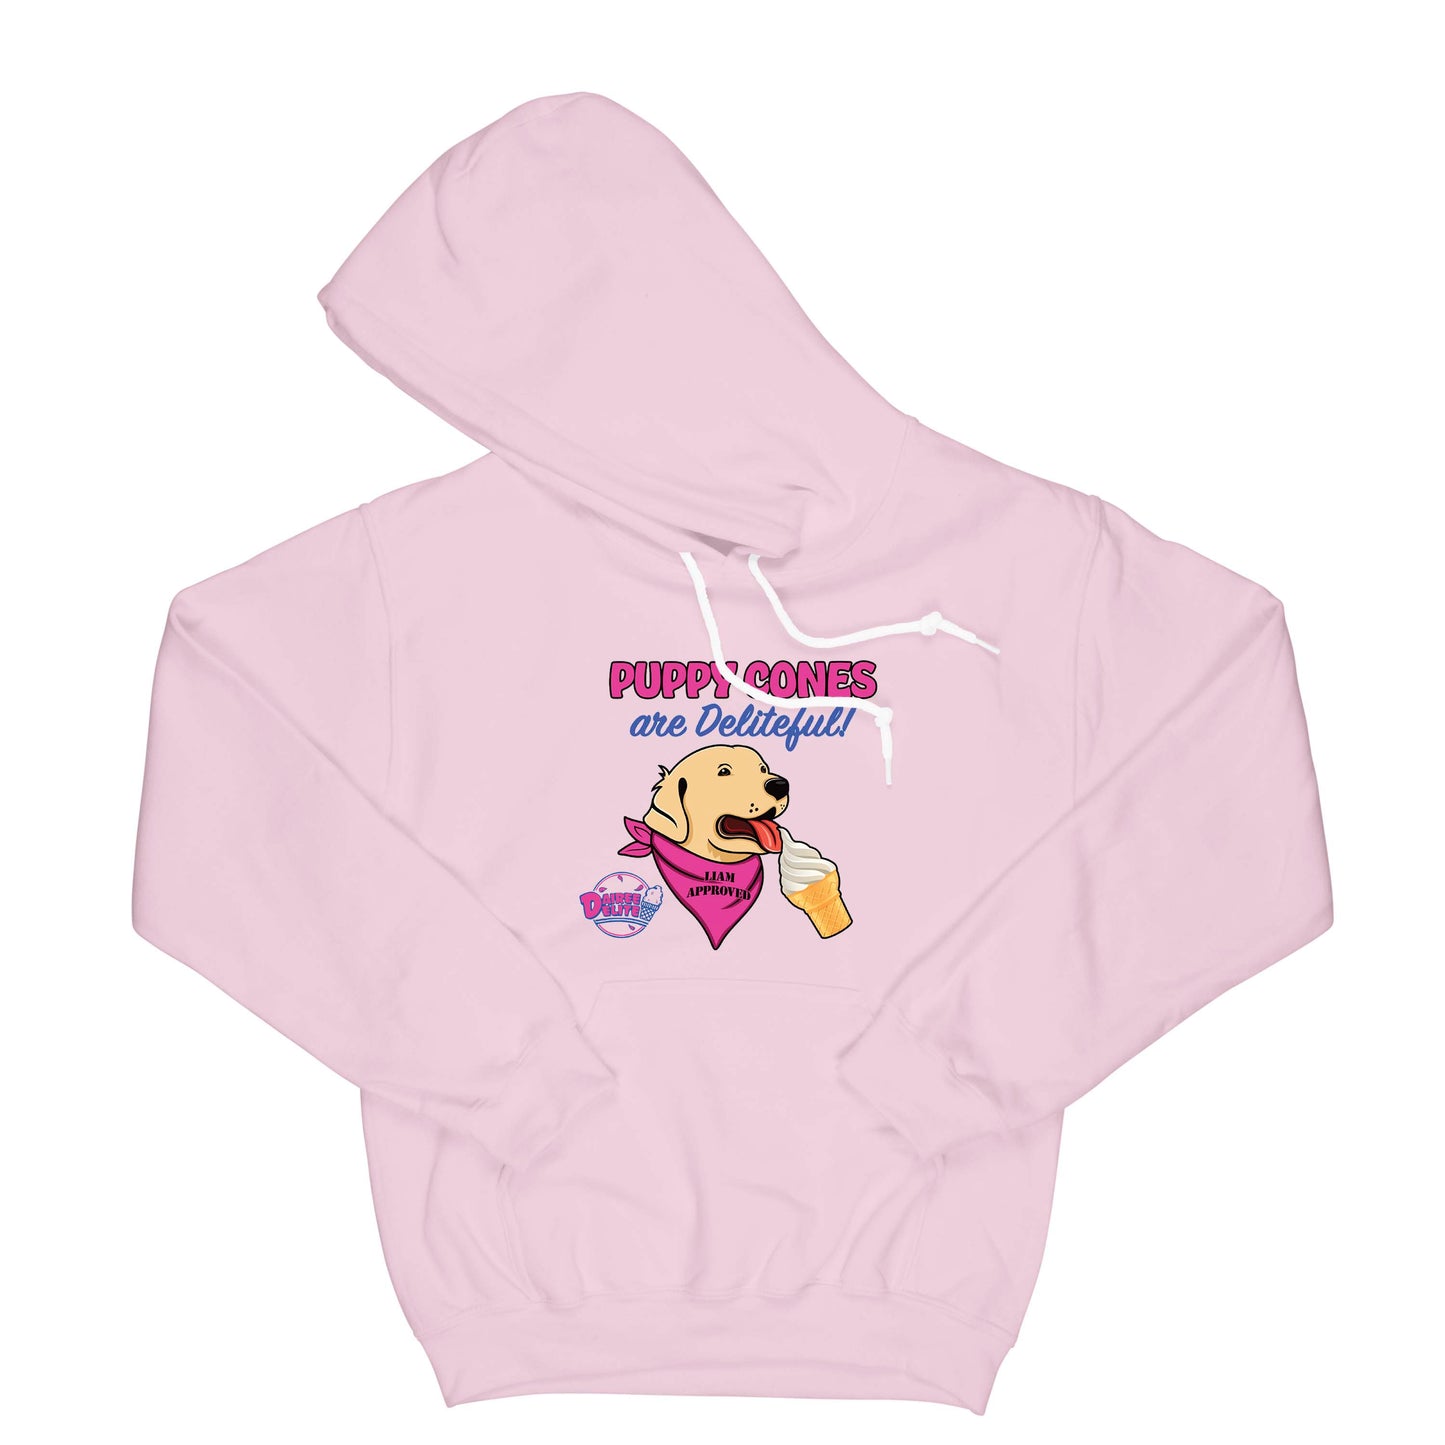 Dairee Delite 70th Anniversary Puppy Cone Hoodie Small Light Pink